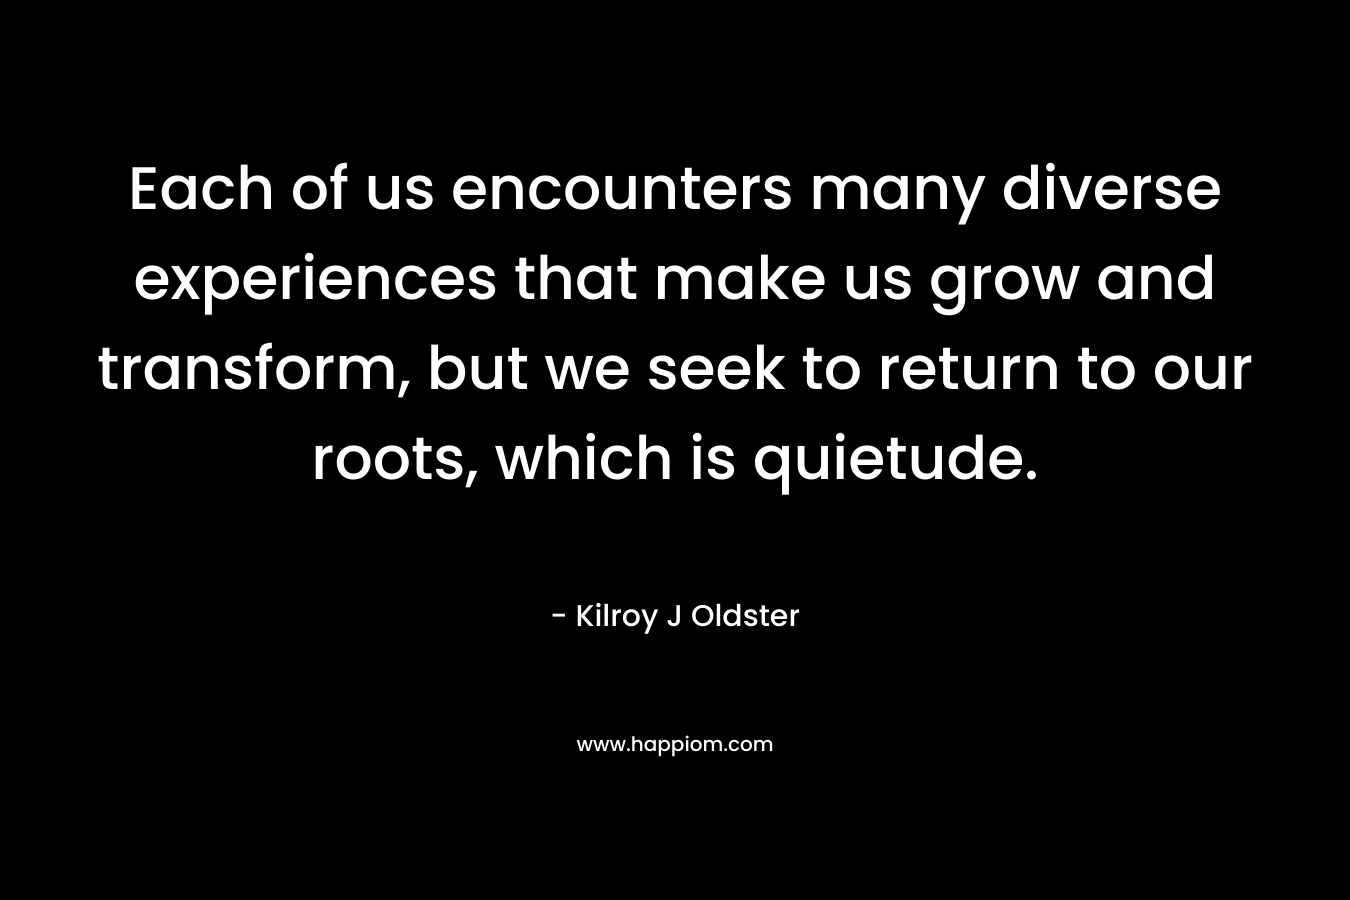 Each of us encounters many diverse experiences that make us grow and transform, but we seek to return to our roots, which is quietude. – Kilroy J Oldster